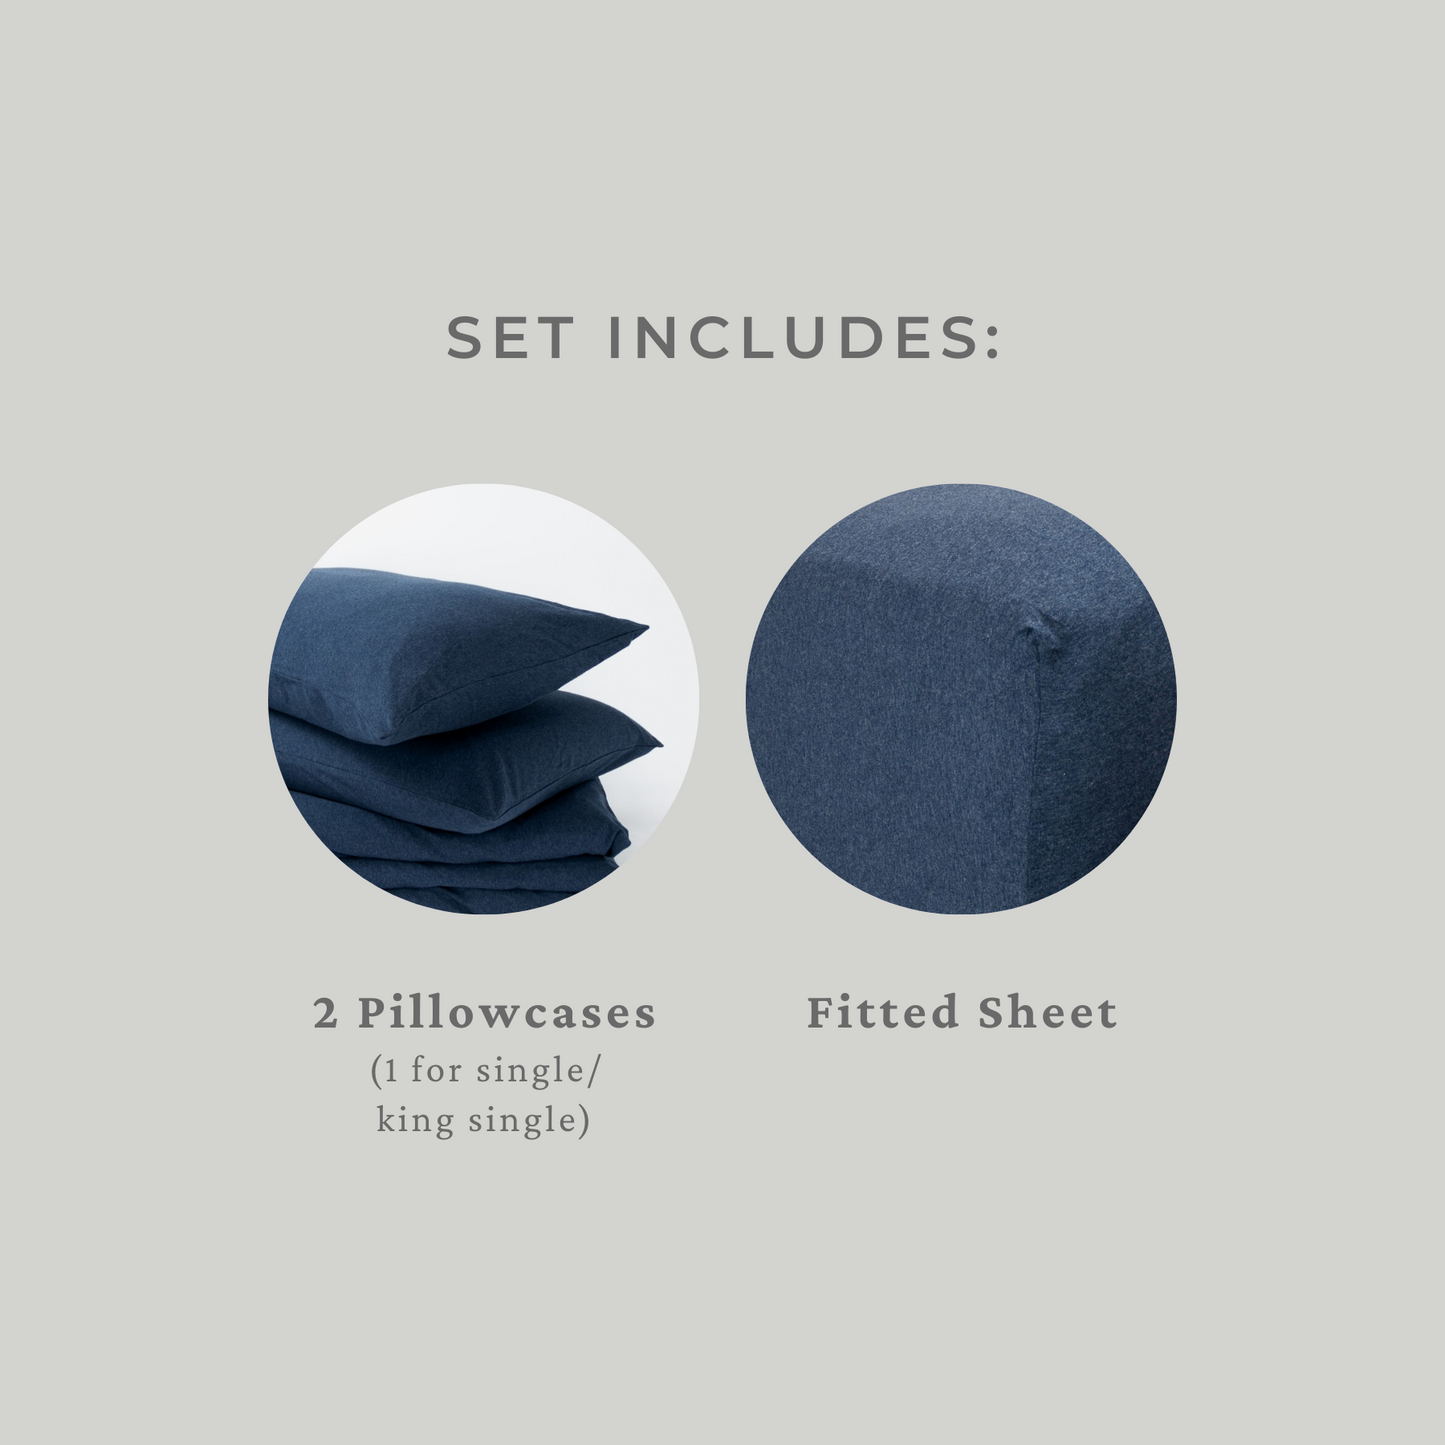 Set includes: fitted sheet and two pillowcases (one for single or king single)